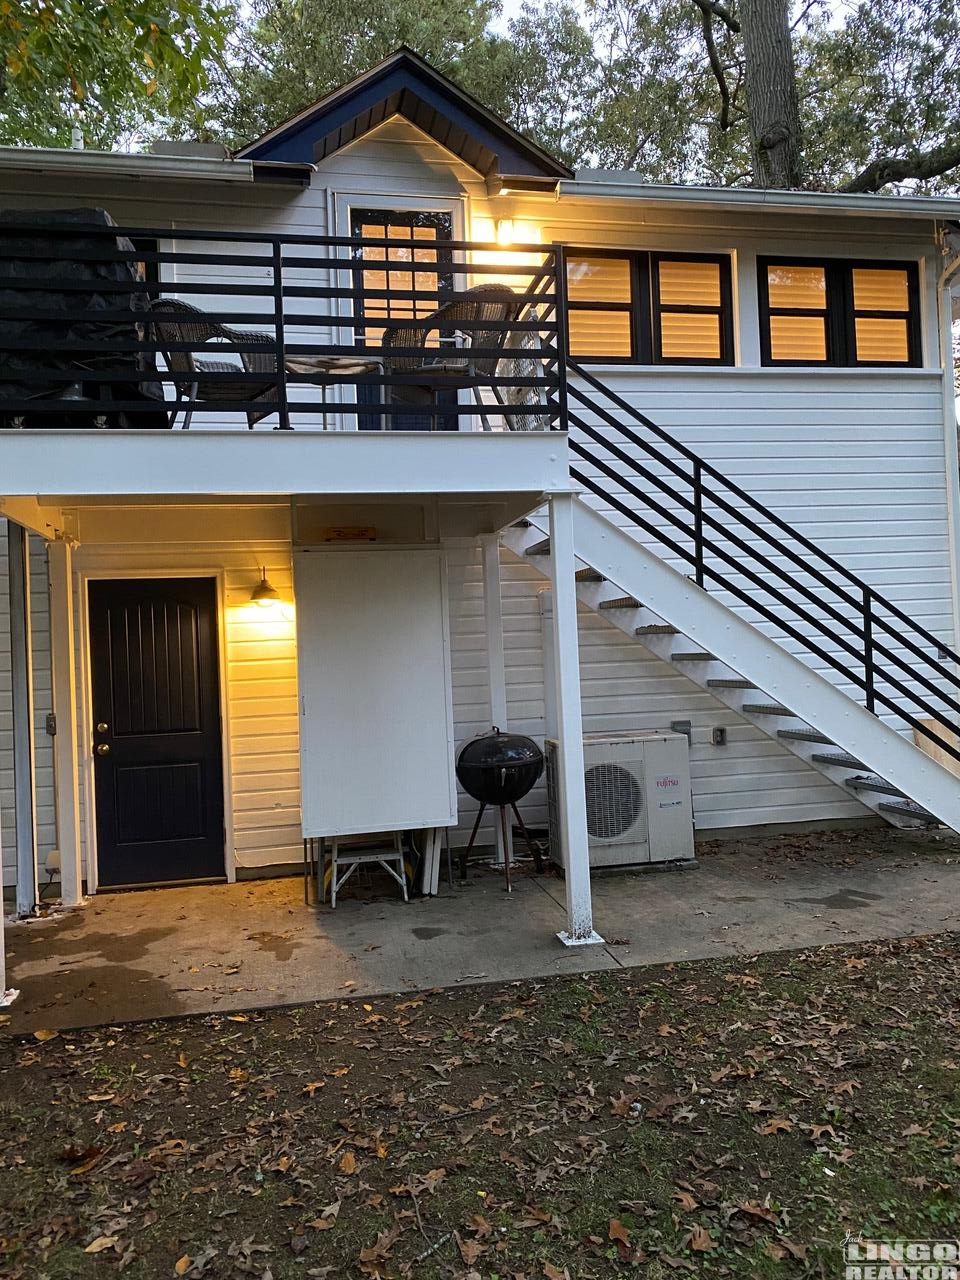 11bext Delaware Beach Vacation Rentals - Results from #680